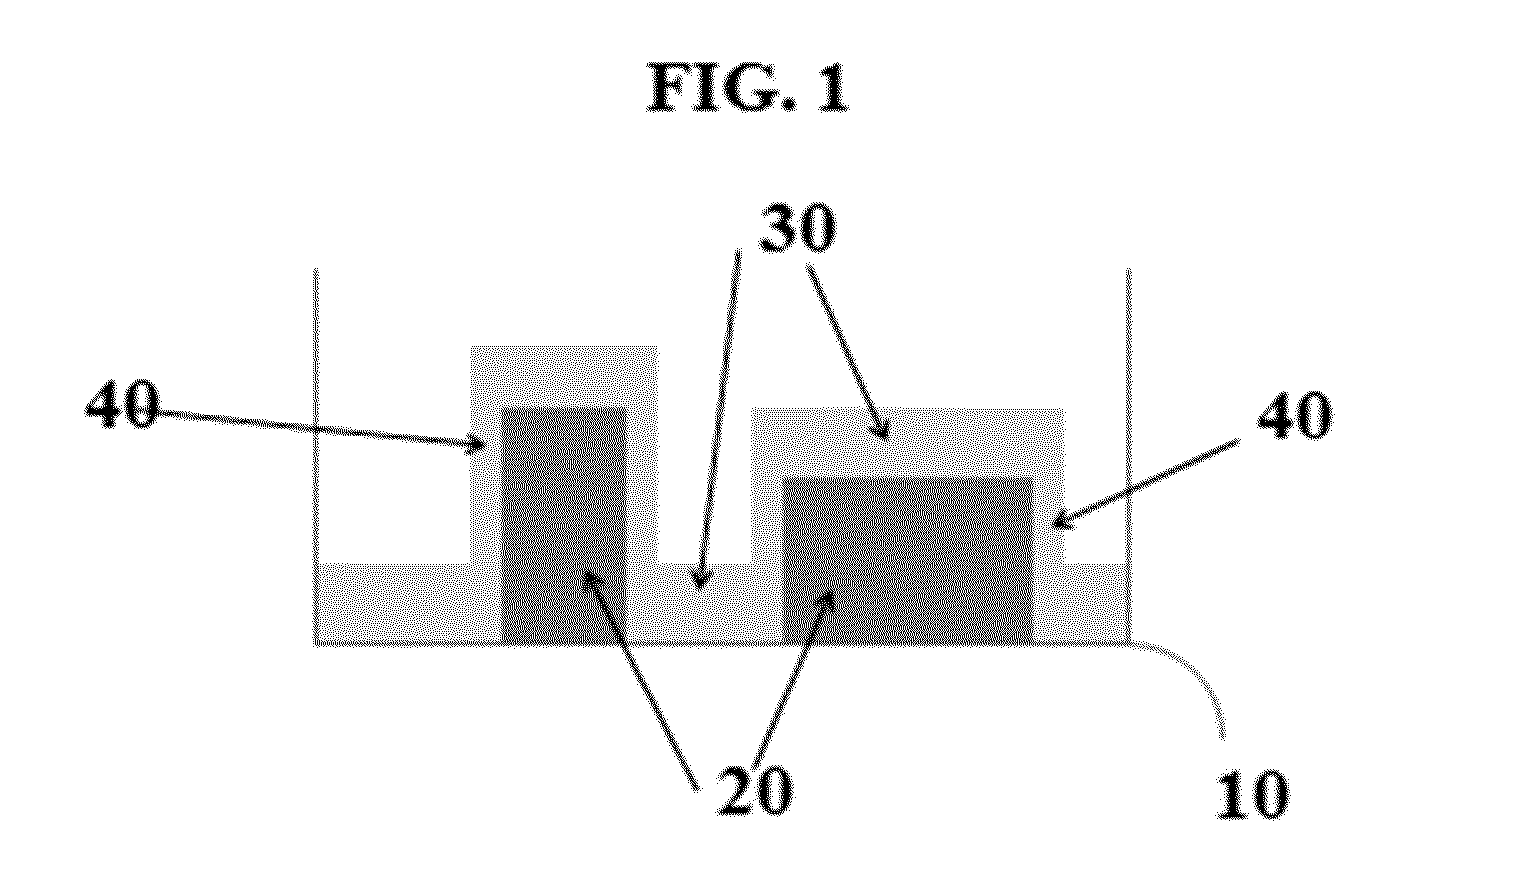 Formulated resin compositions for flood coating electronic circuit assemblies